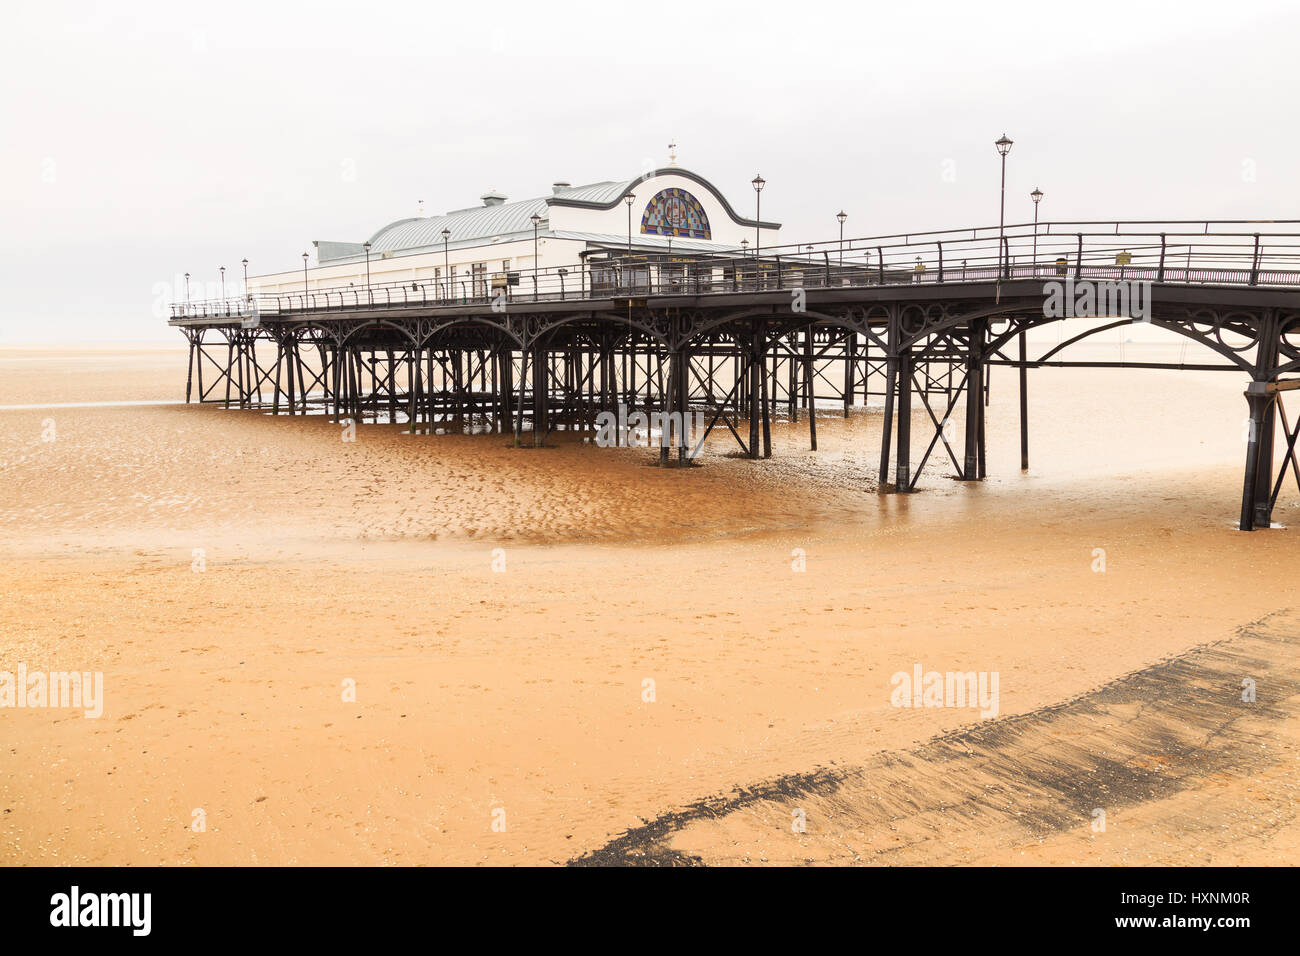 CLEETHORPES, ENGLAND - MARCH 14: Cleethorpes beach, sea and pleasure pier without people. In Cleethorpes, England. On 14th March 2017. Stock Photo